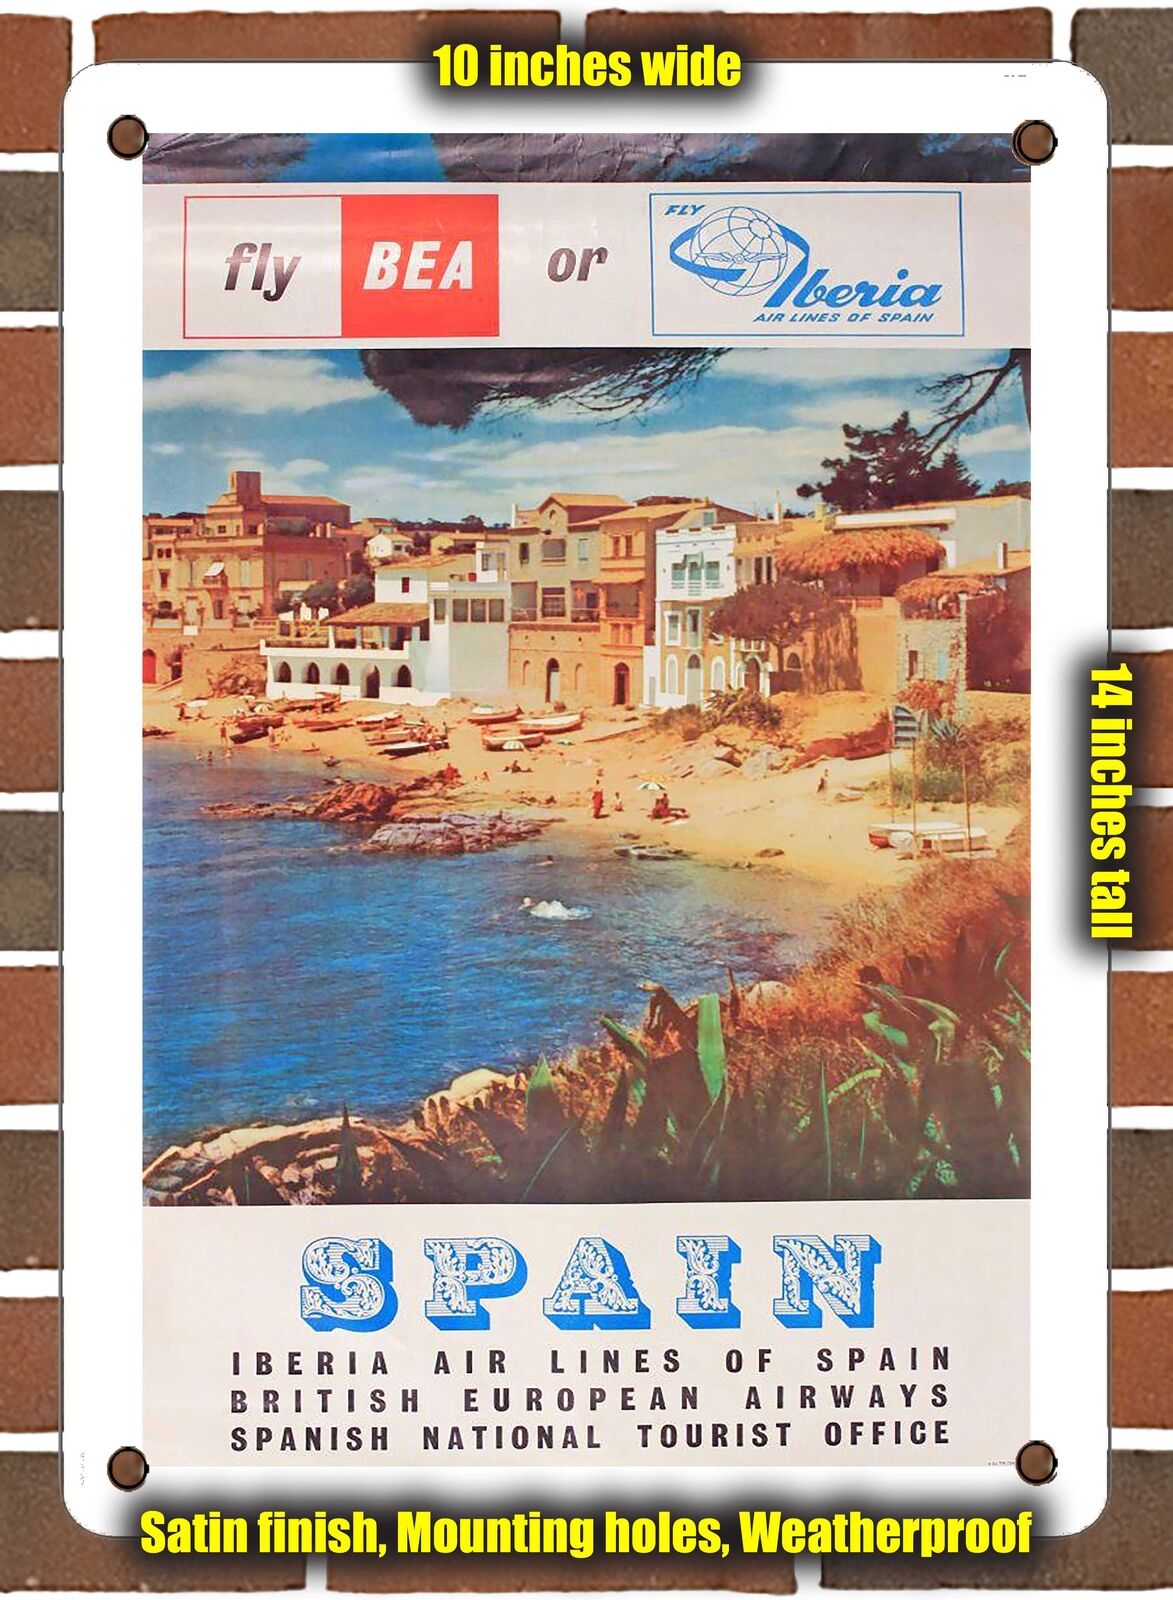 METAL SIGN - 1961 Fly BEA or Iberia Spain - 10x14 Inches